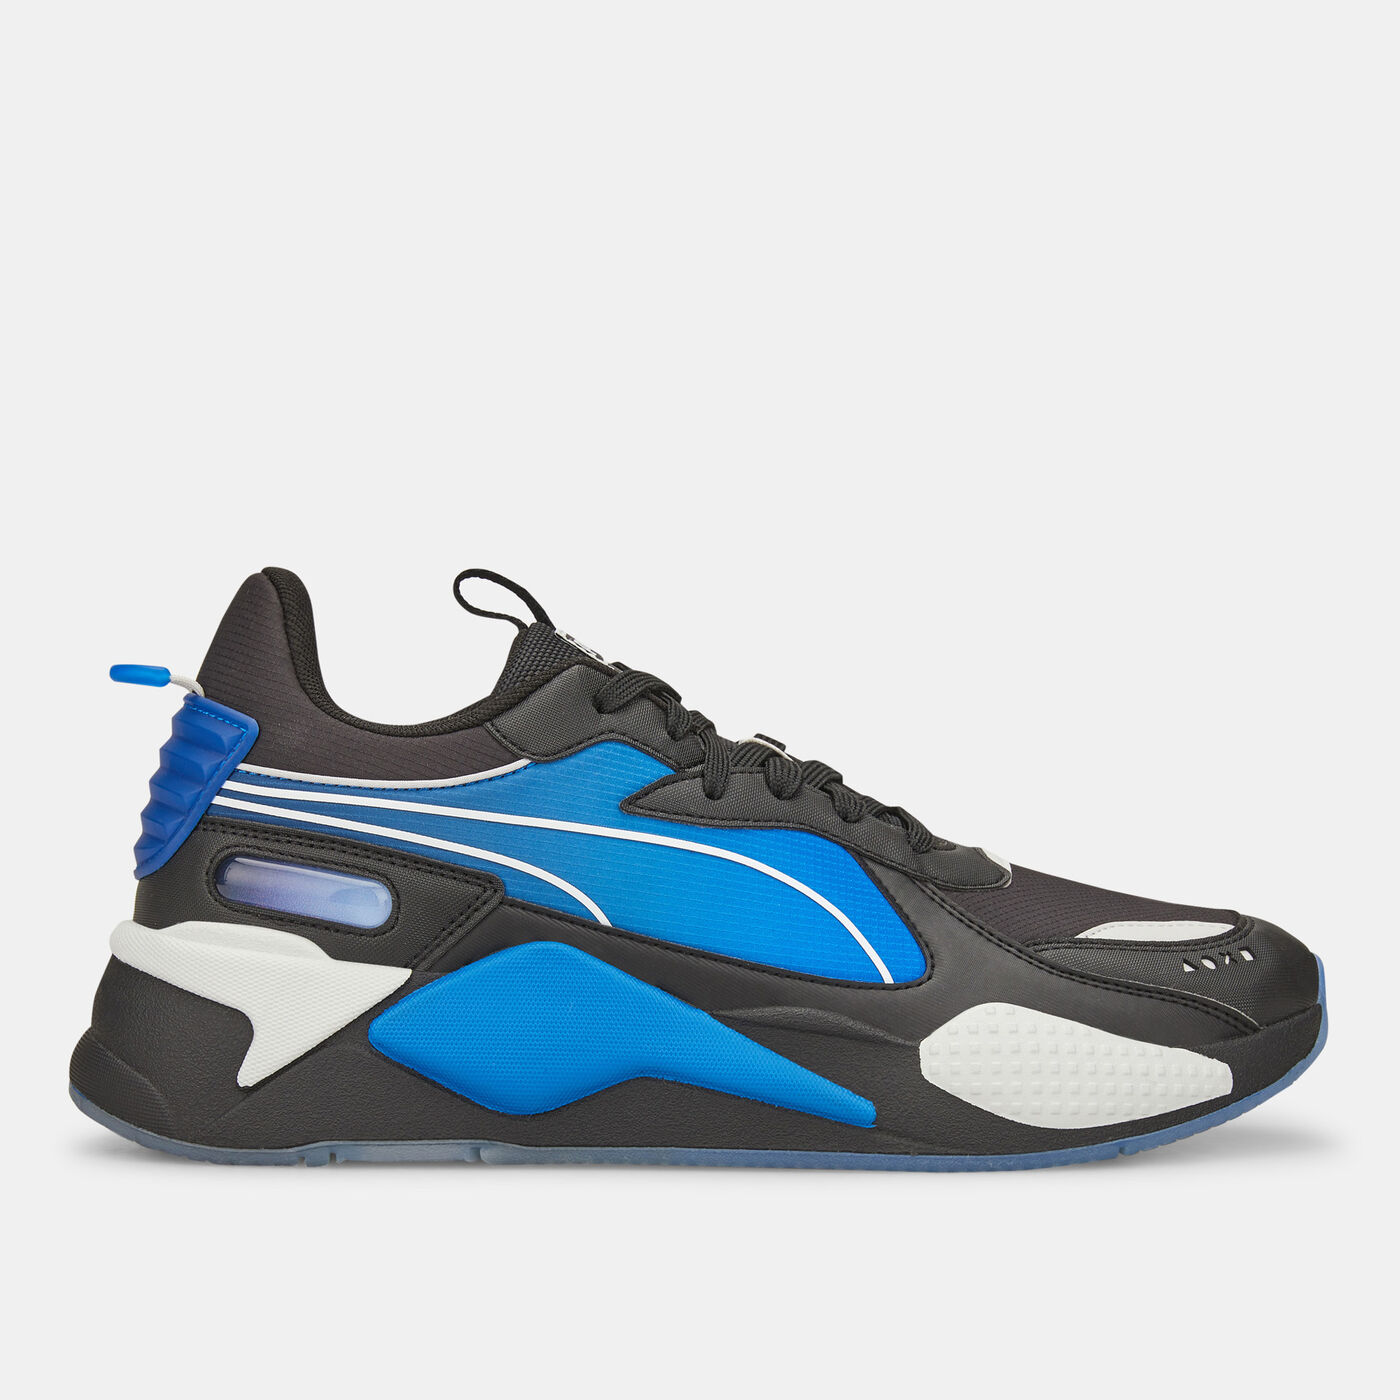 Men's x PLAYSTATION RS-X Shoes